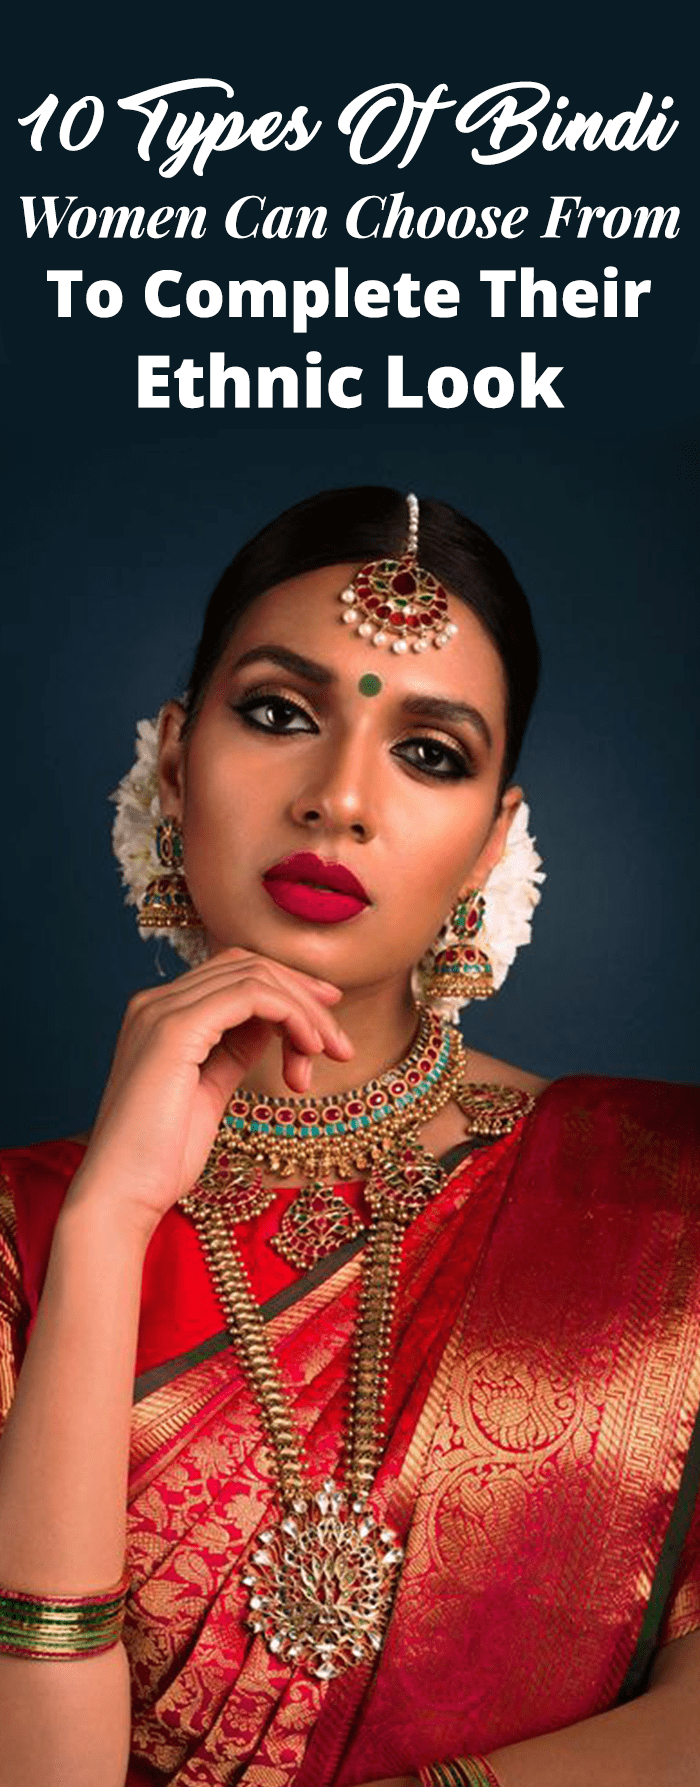 5 Tips To Style The Bindi According To Your Different Face Shape